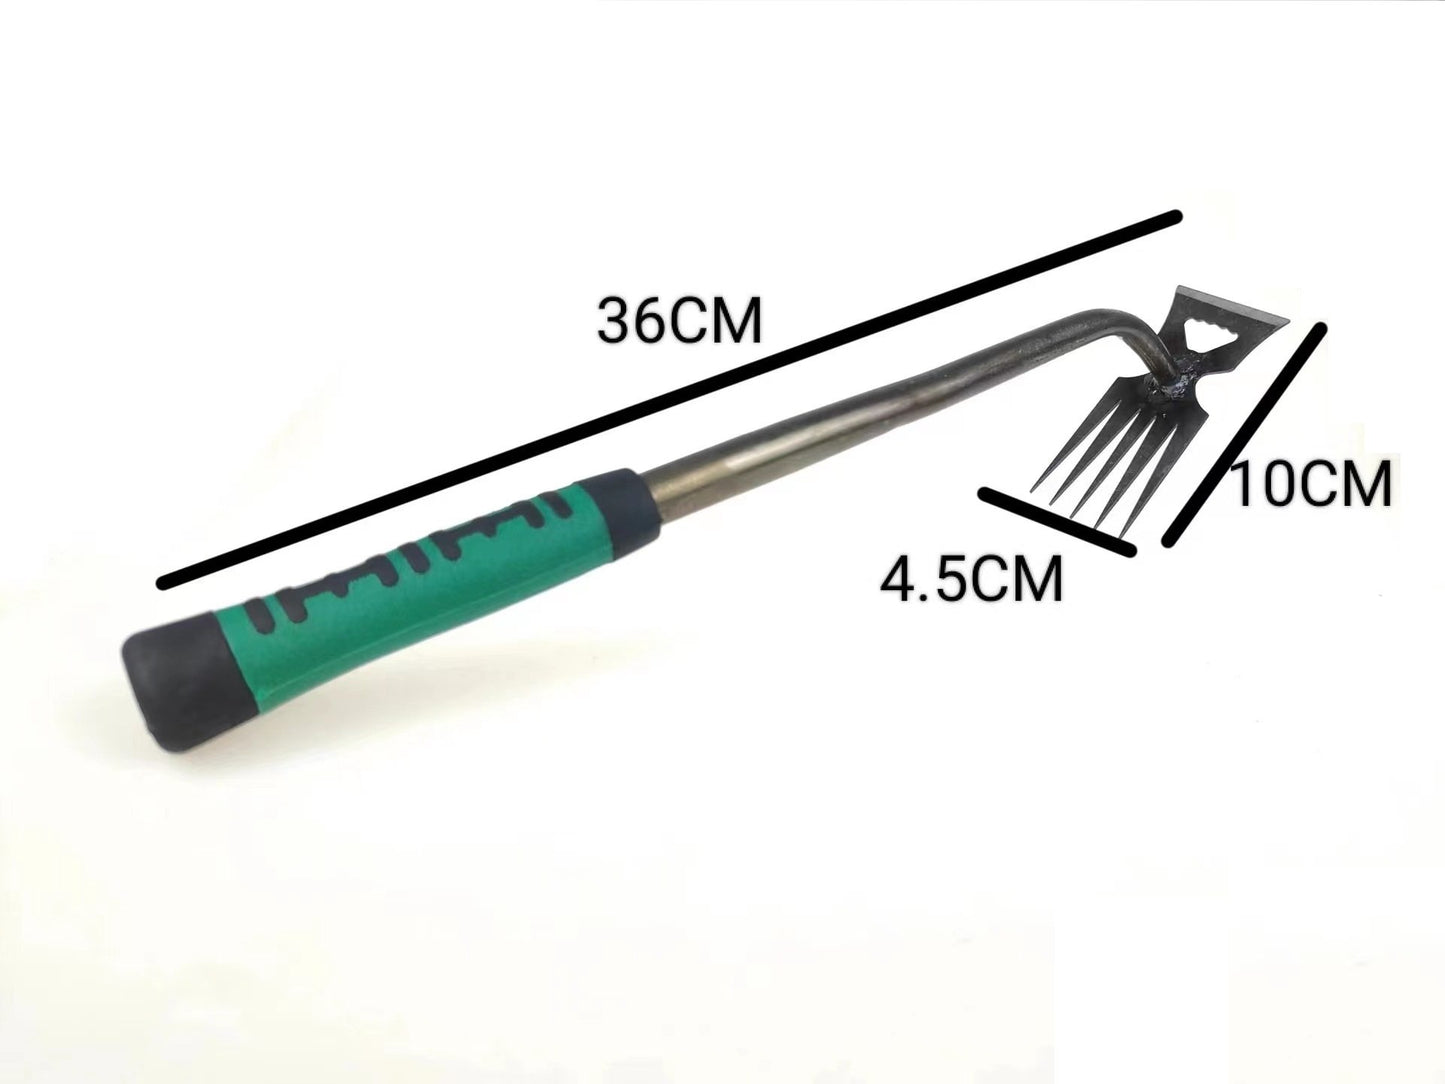 Manual Weed Remover Tool for Lawn and Garden